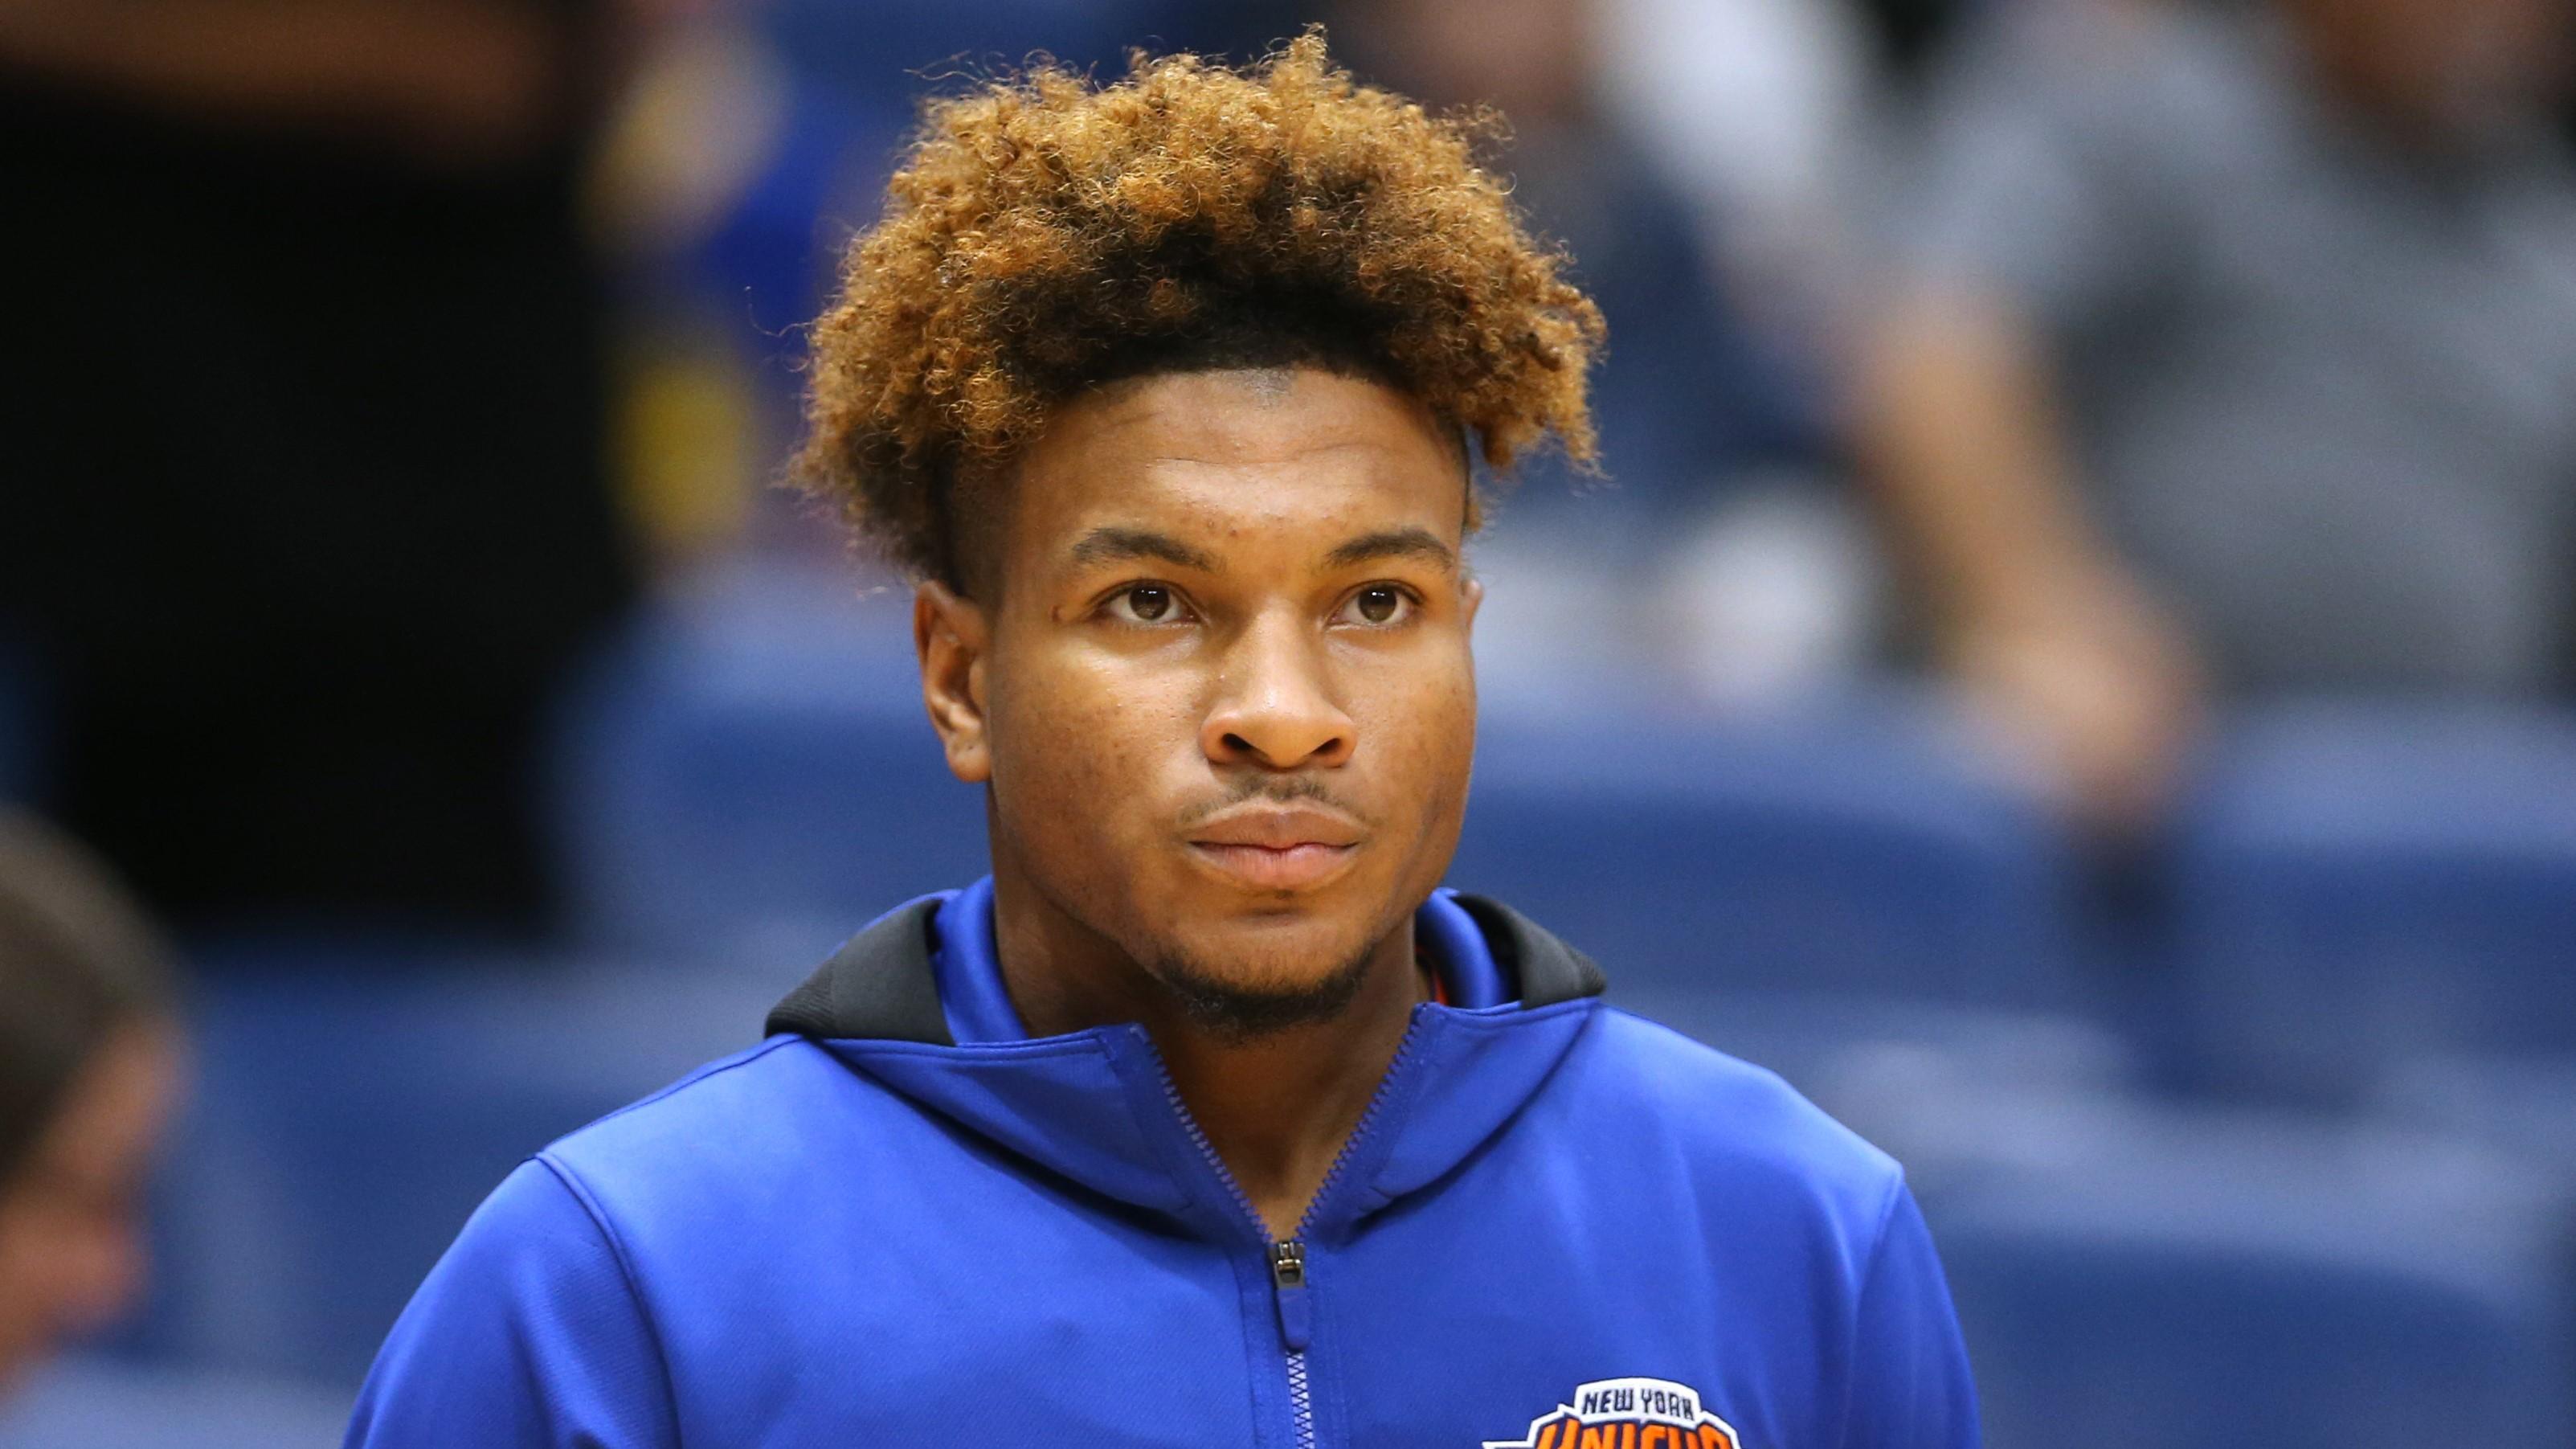 Oct 30, 2021; New Orleans, Louisiana, USA; New York Knicks guard Miles McBride (2) before their game against the New Orleans Pelicans at the Smoothie King Center. Mandatory Credit: Chuck Cook-USA TODAY Sports / Chuck Cook-USA TODAY Sports